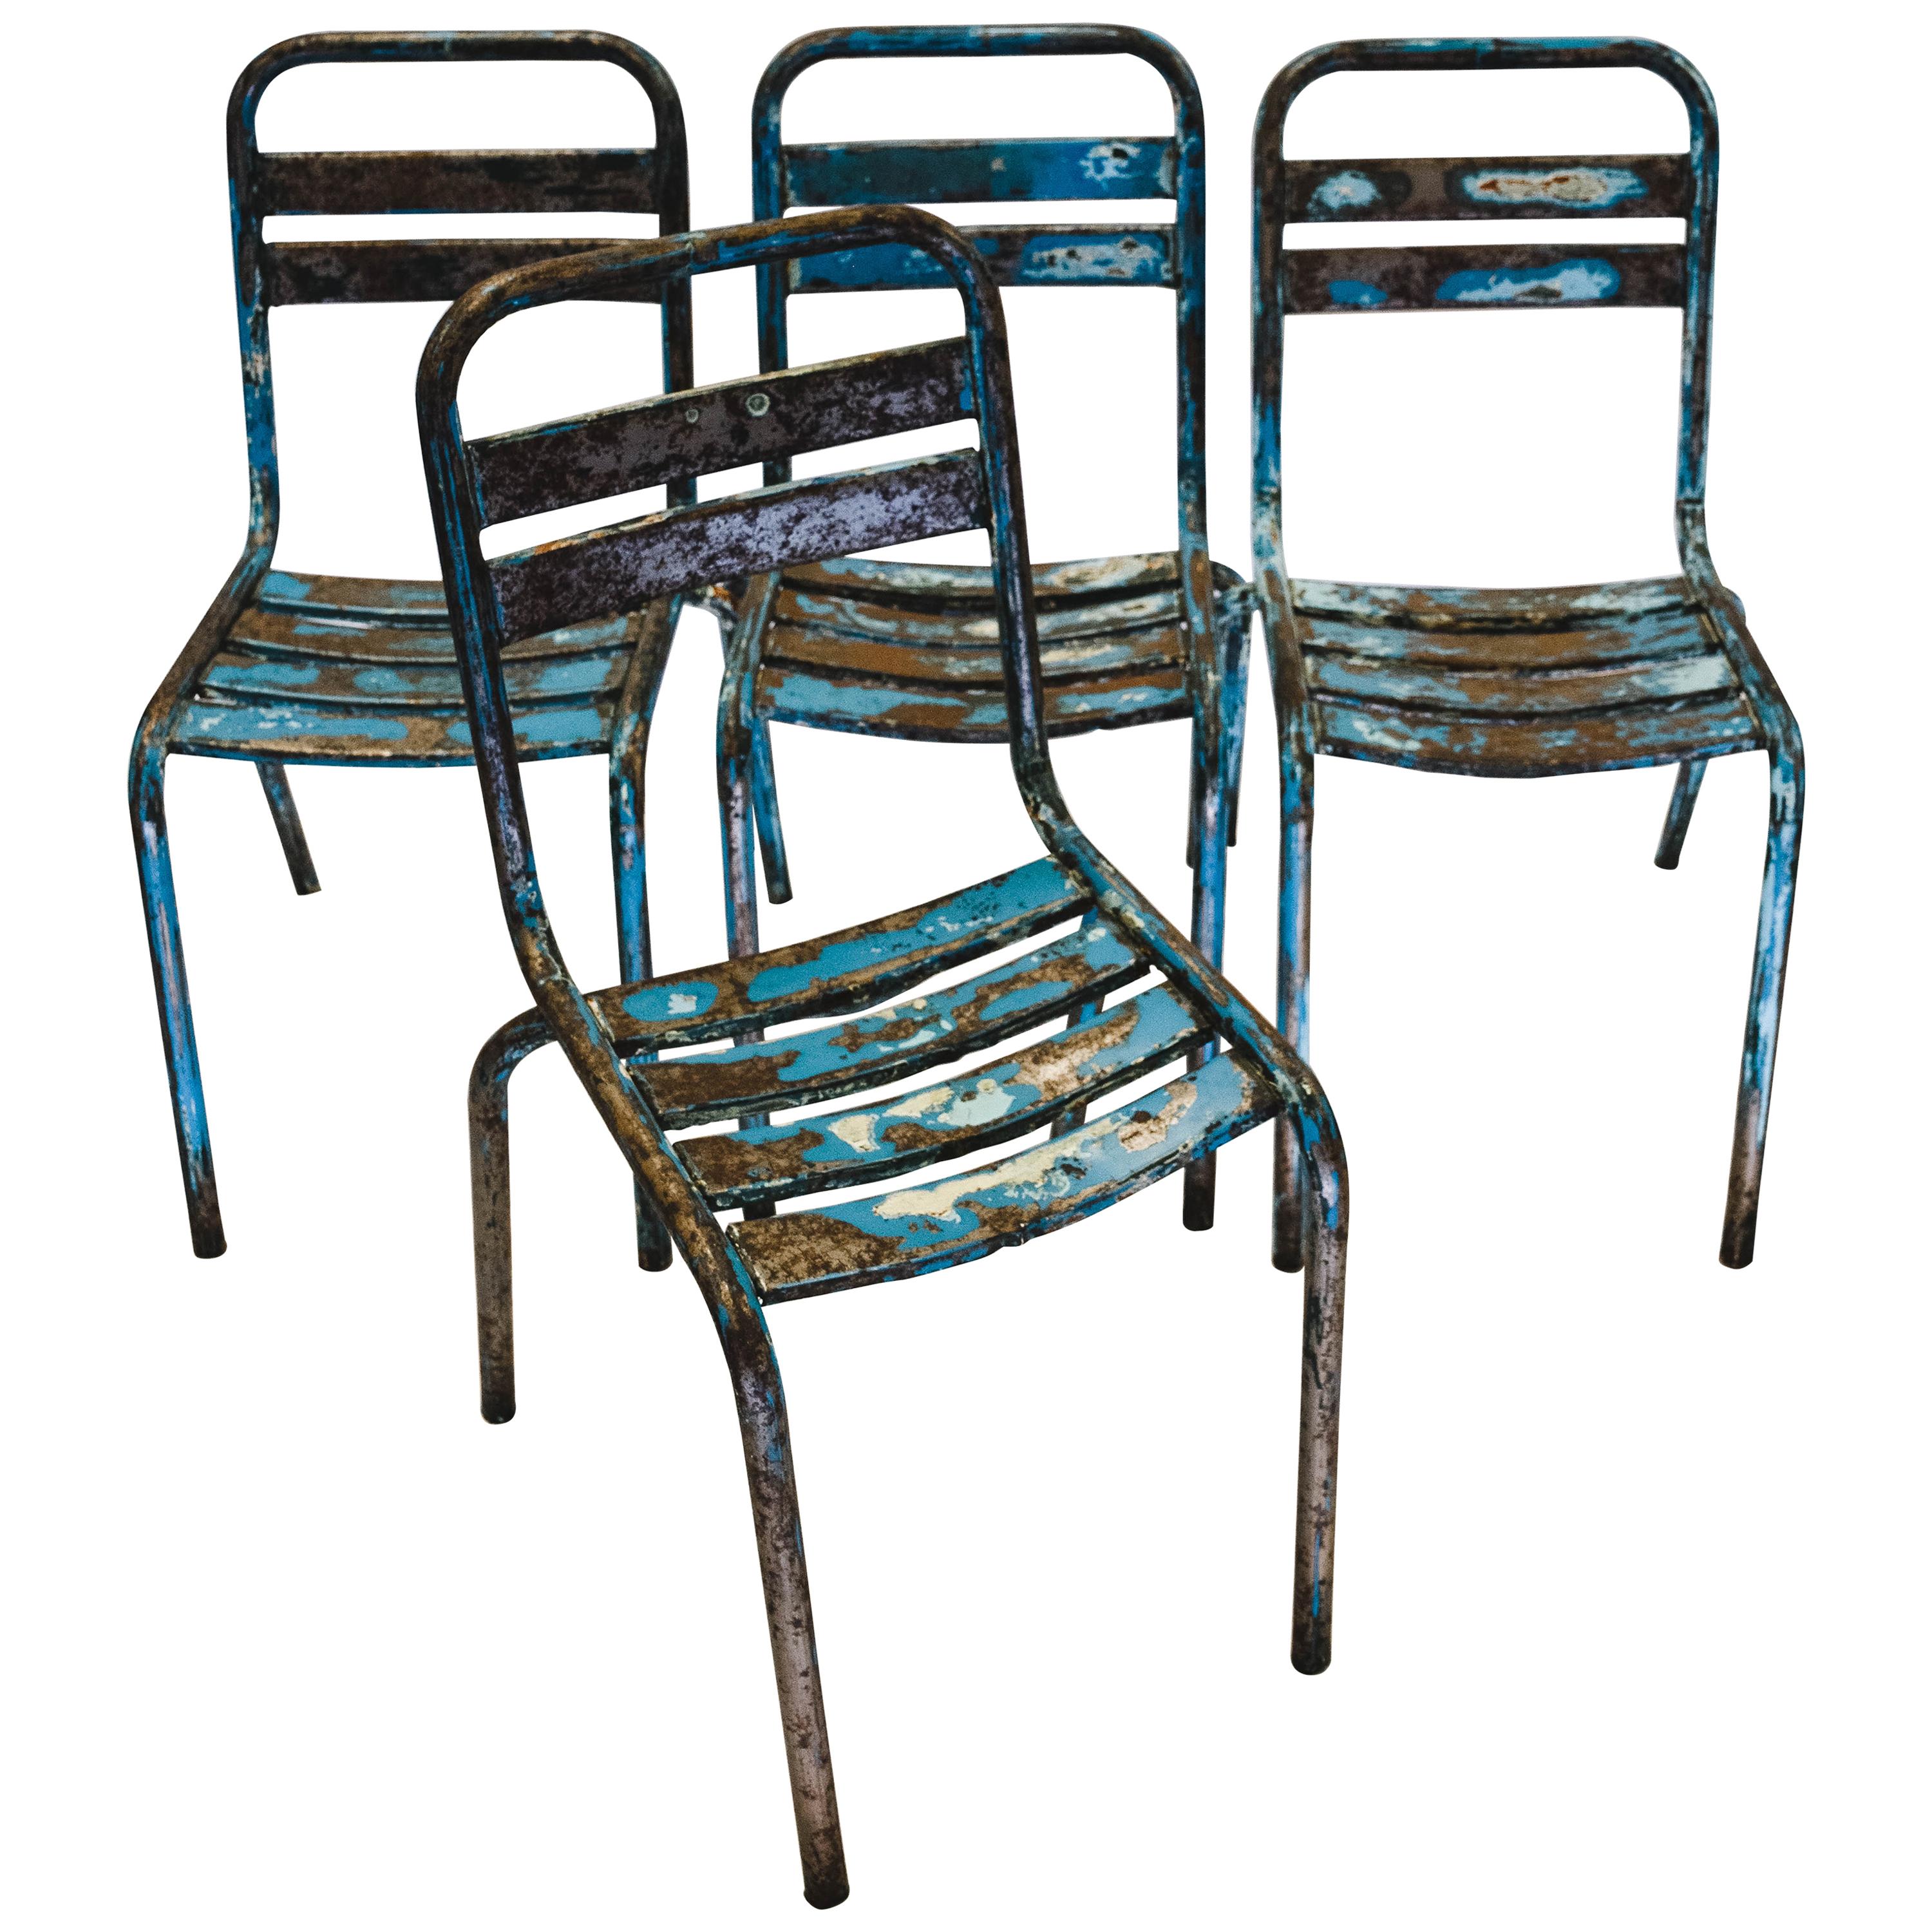 1950s vintage original French Tolix Industrial blue metal cafe dining chairs – set of four.
This Tolix model features a slatted seat and back with beautiful aged brass brazing marks. Painted in the original blue these chairs are in exceptional